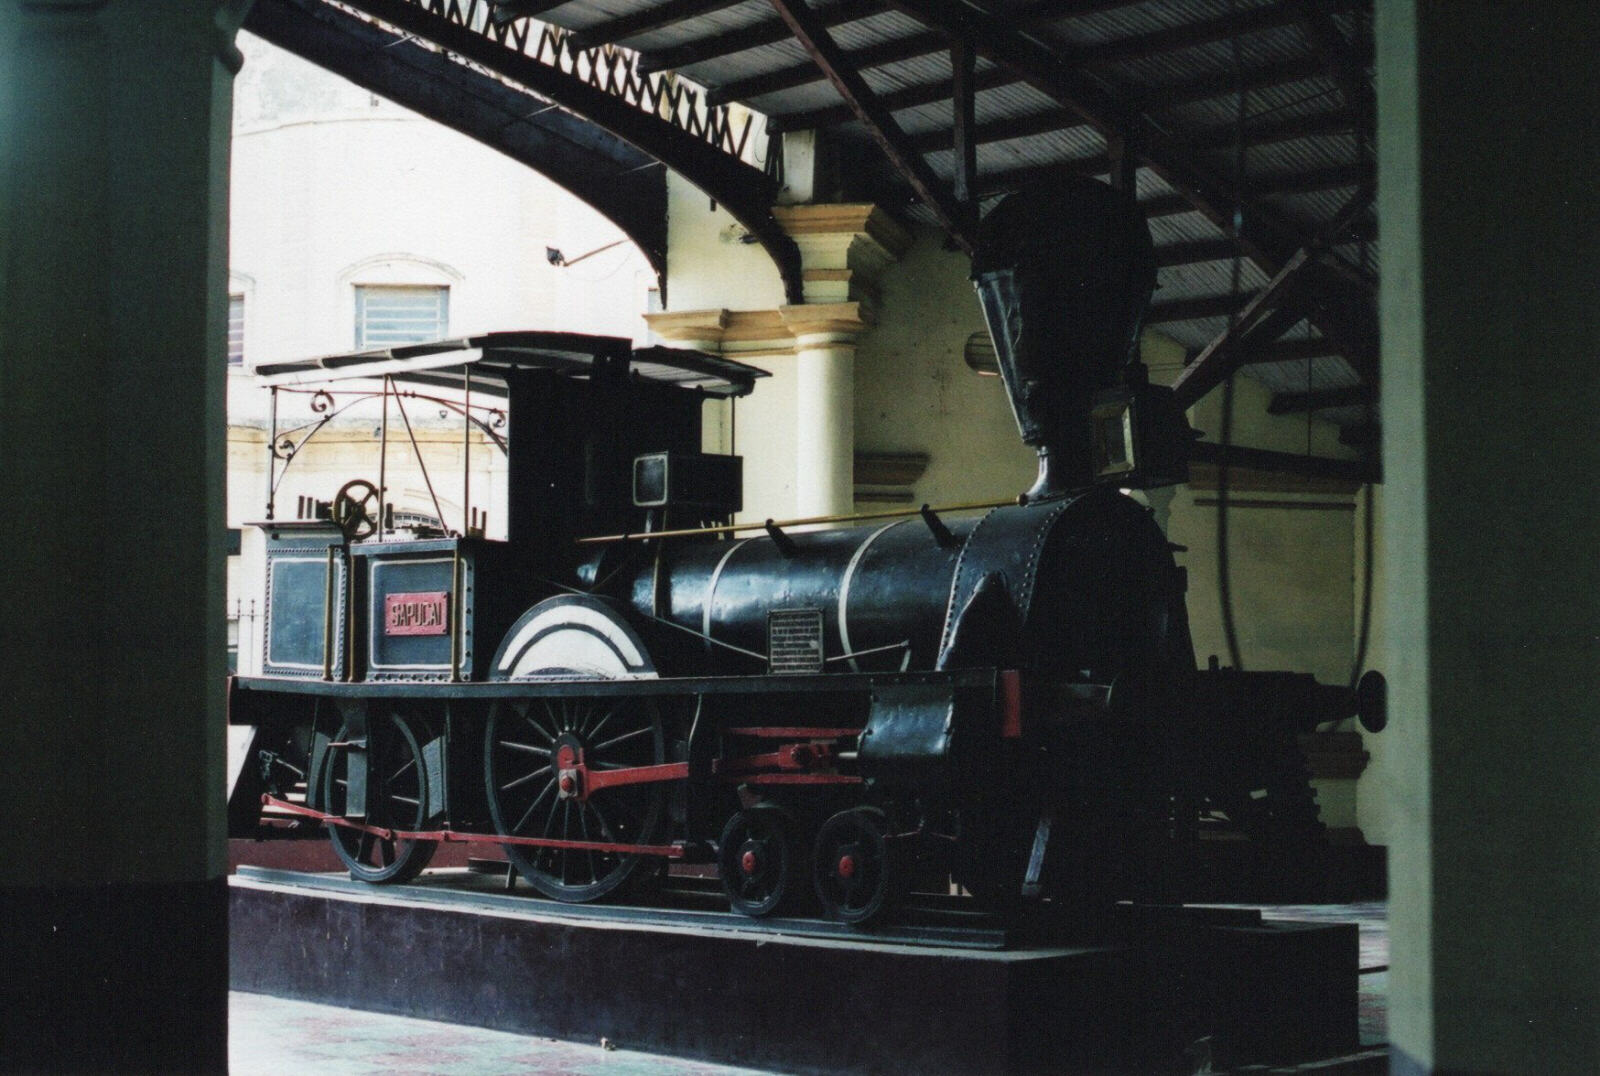 In the railway station in Asuncion, Paraguay